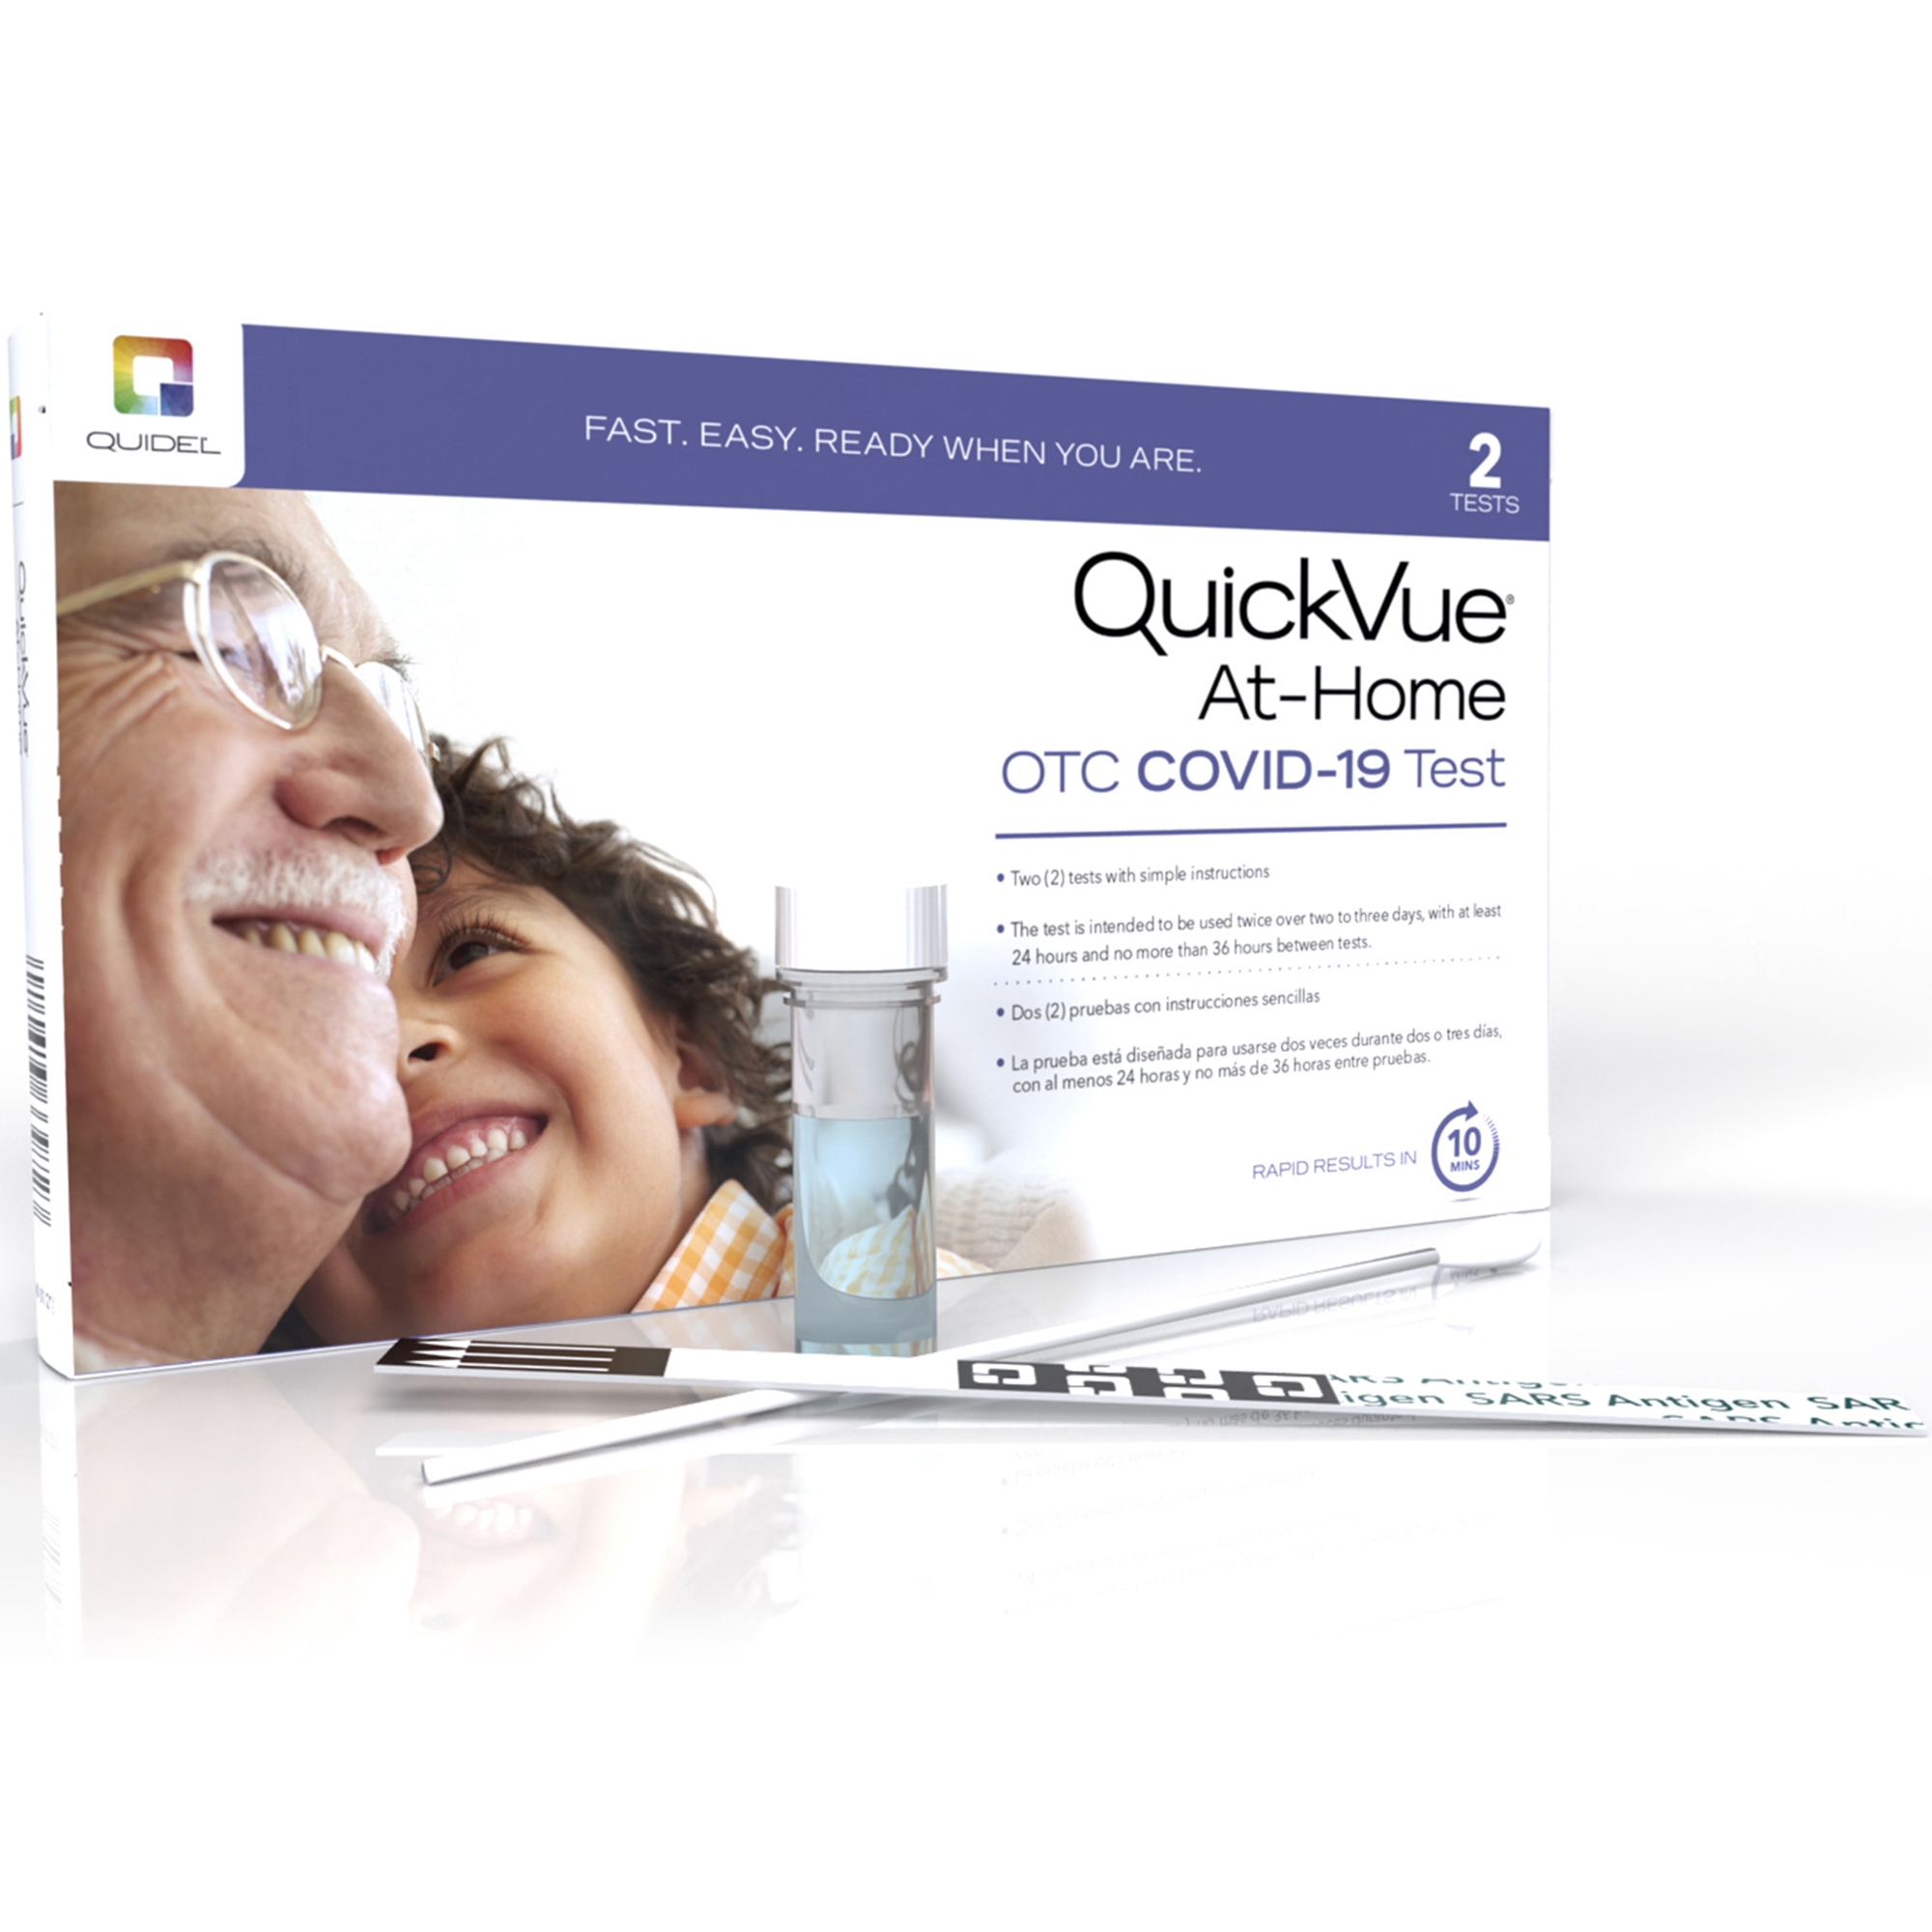 Quidel QuickVue At-Home COVID-19 Test - 10 Minute Results at Home - image 1 of 7